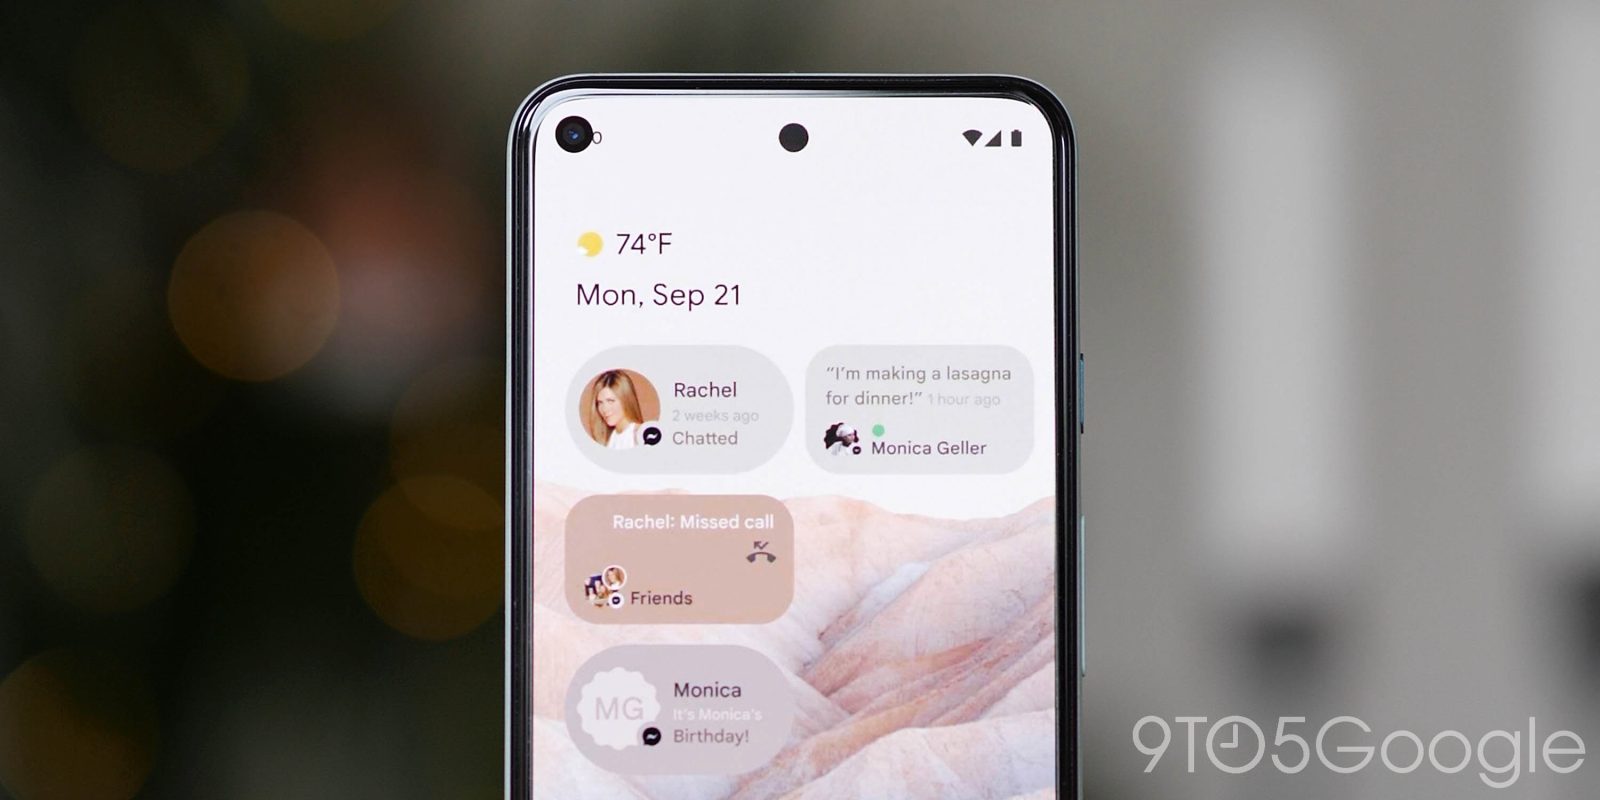 This week’s top stories: Android 12 design leak, Pixel Buds update, Samsung Galaxy ads, more